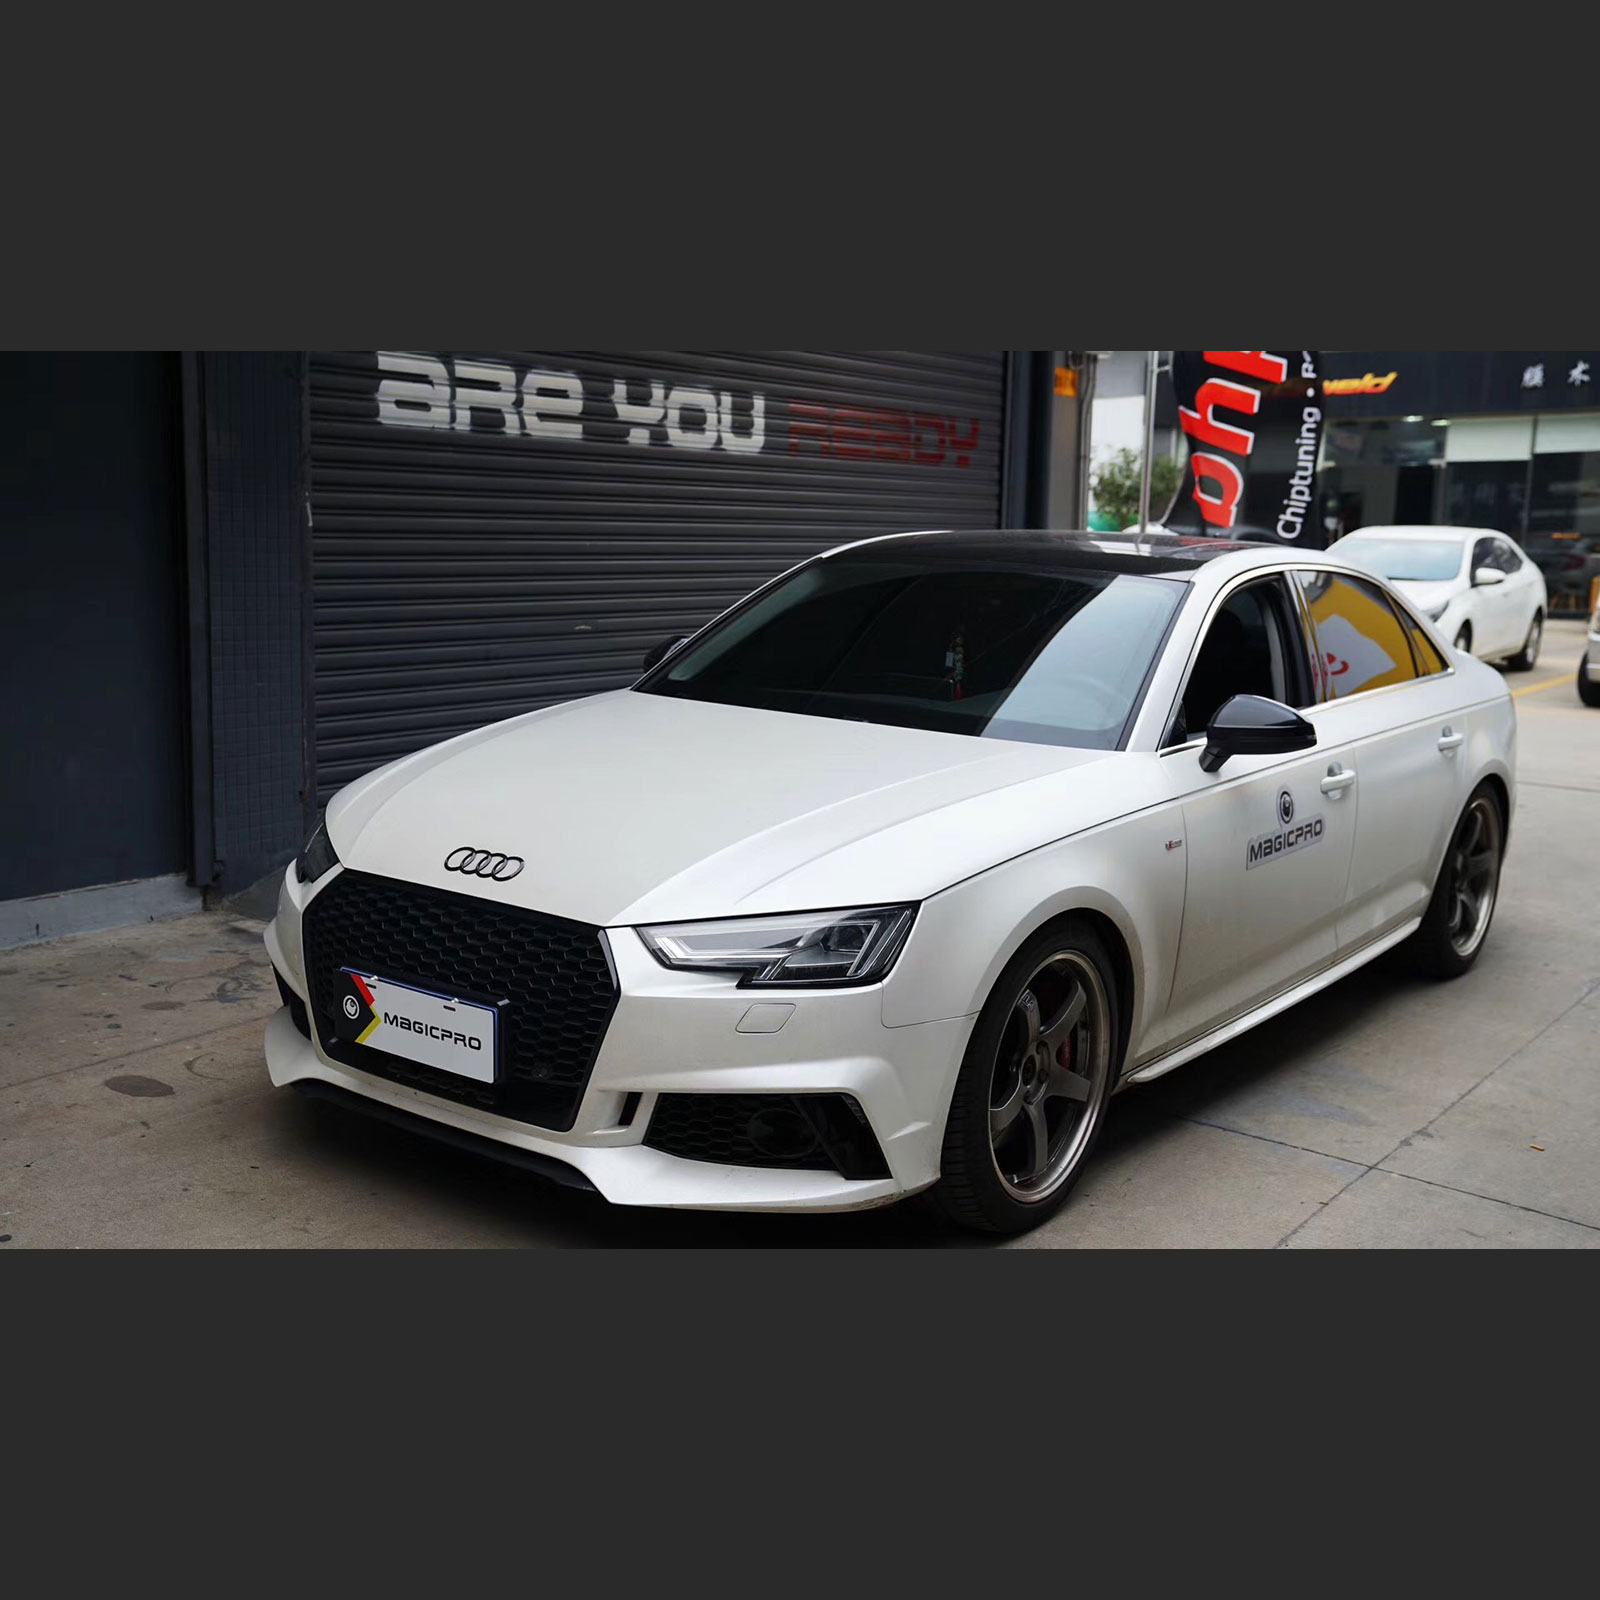 Audi Chip tuning: A4